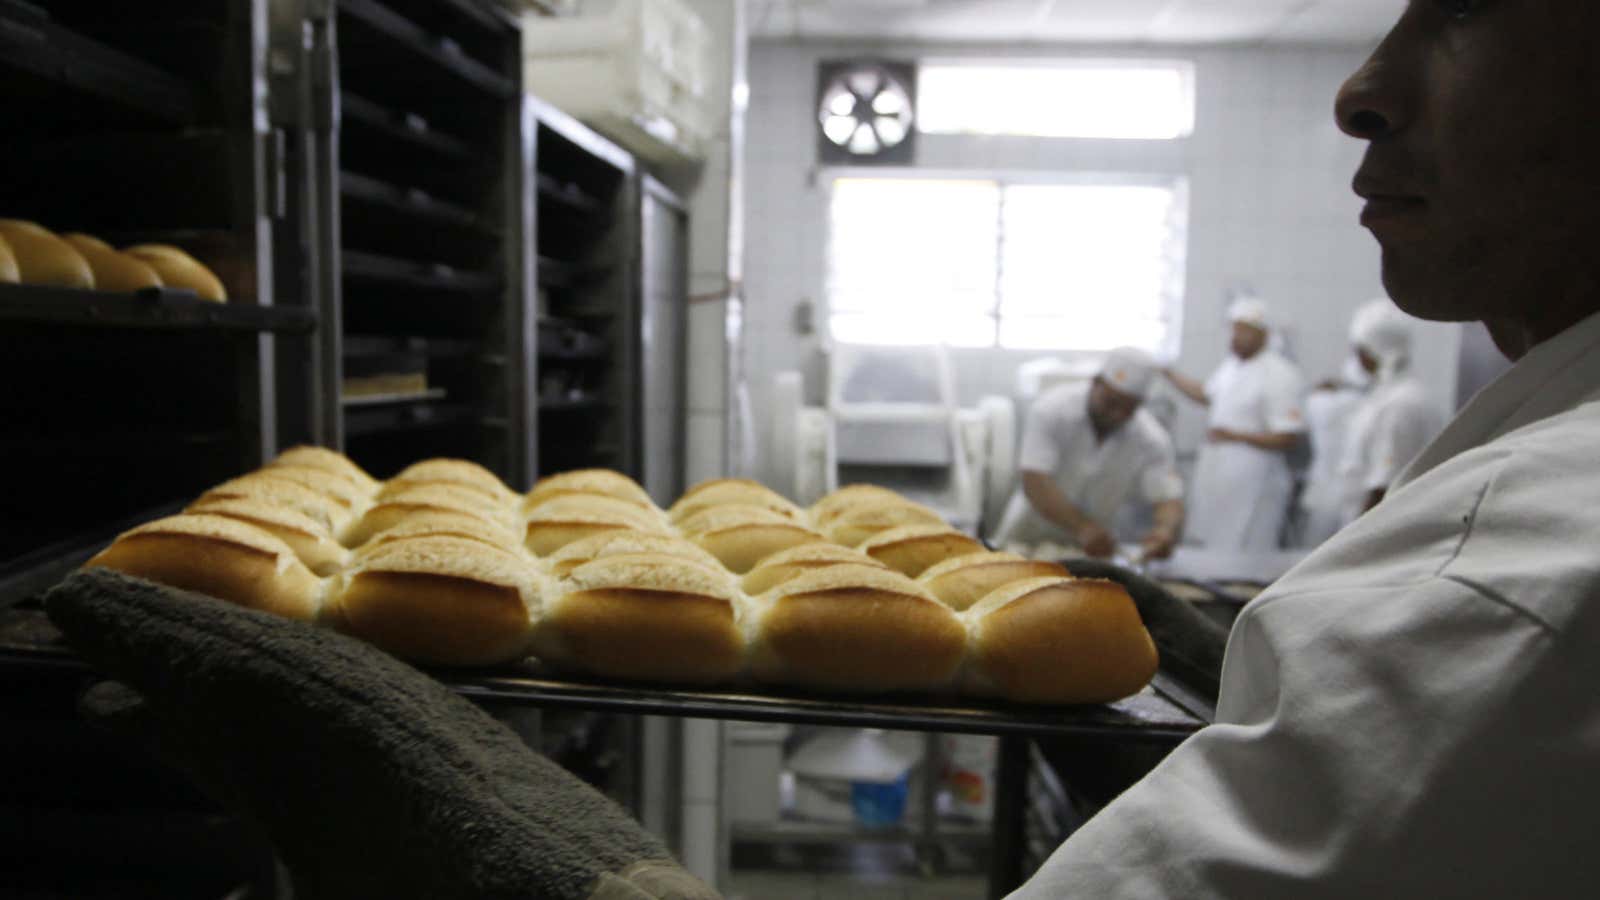 Brazil’s half-baked monetary policy has caused flour prices to spike.